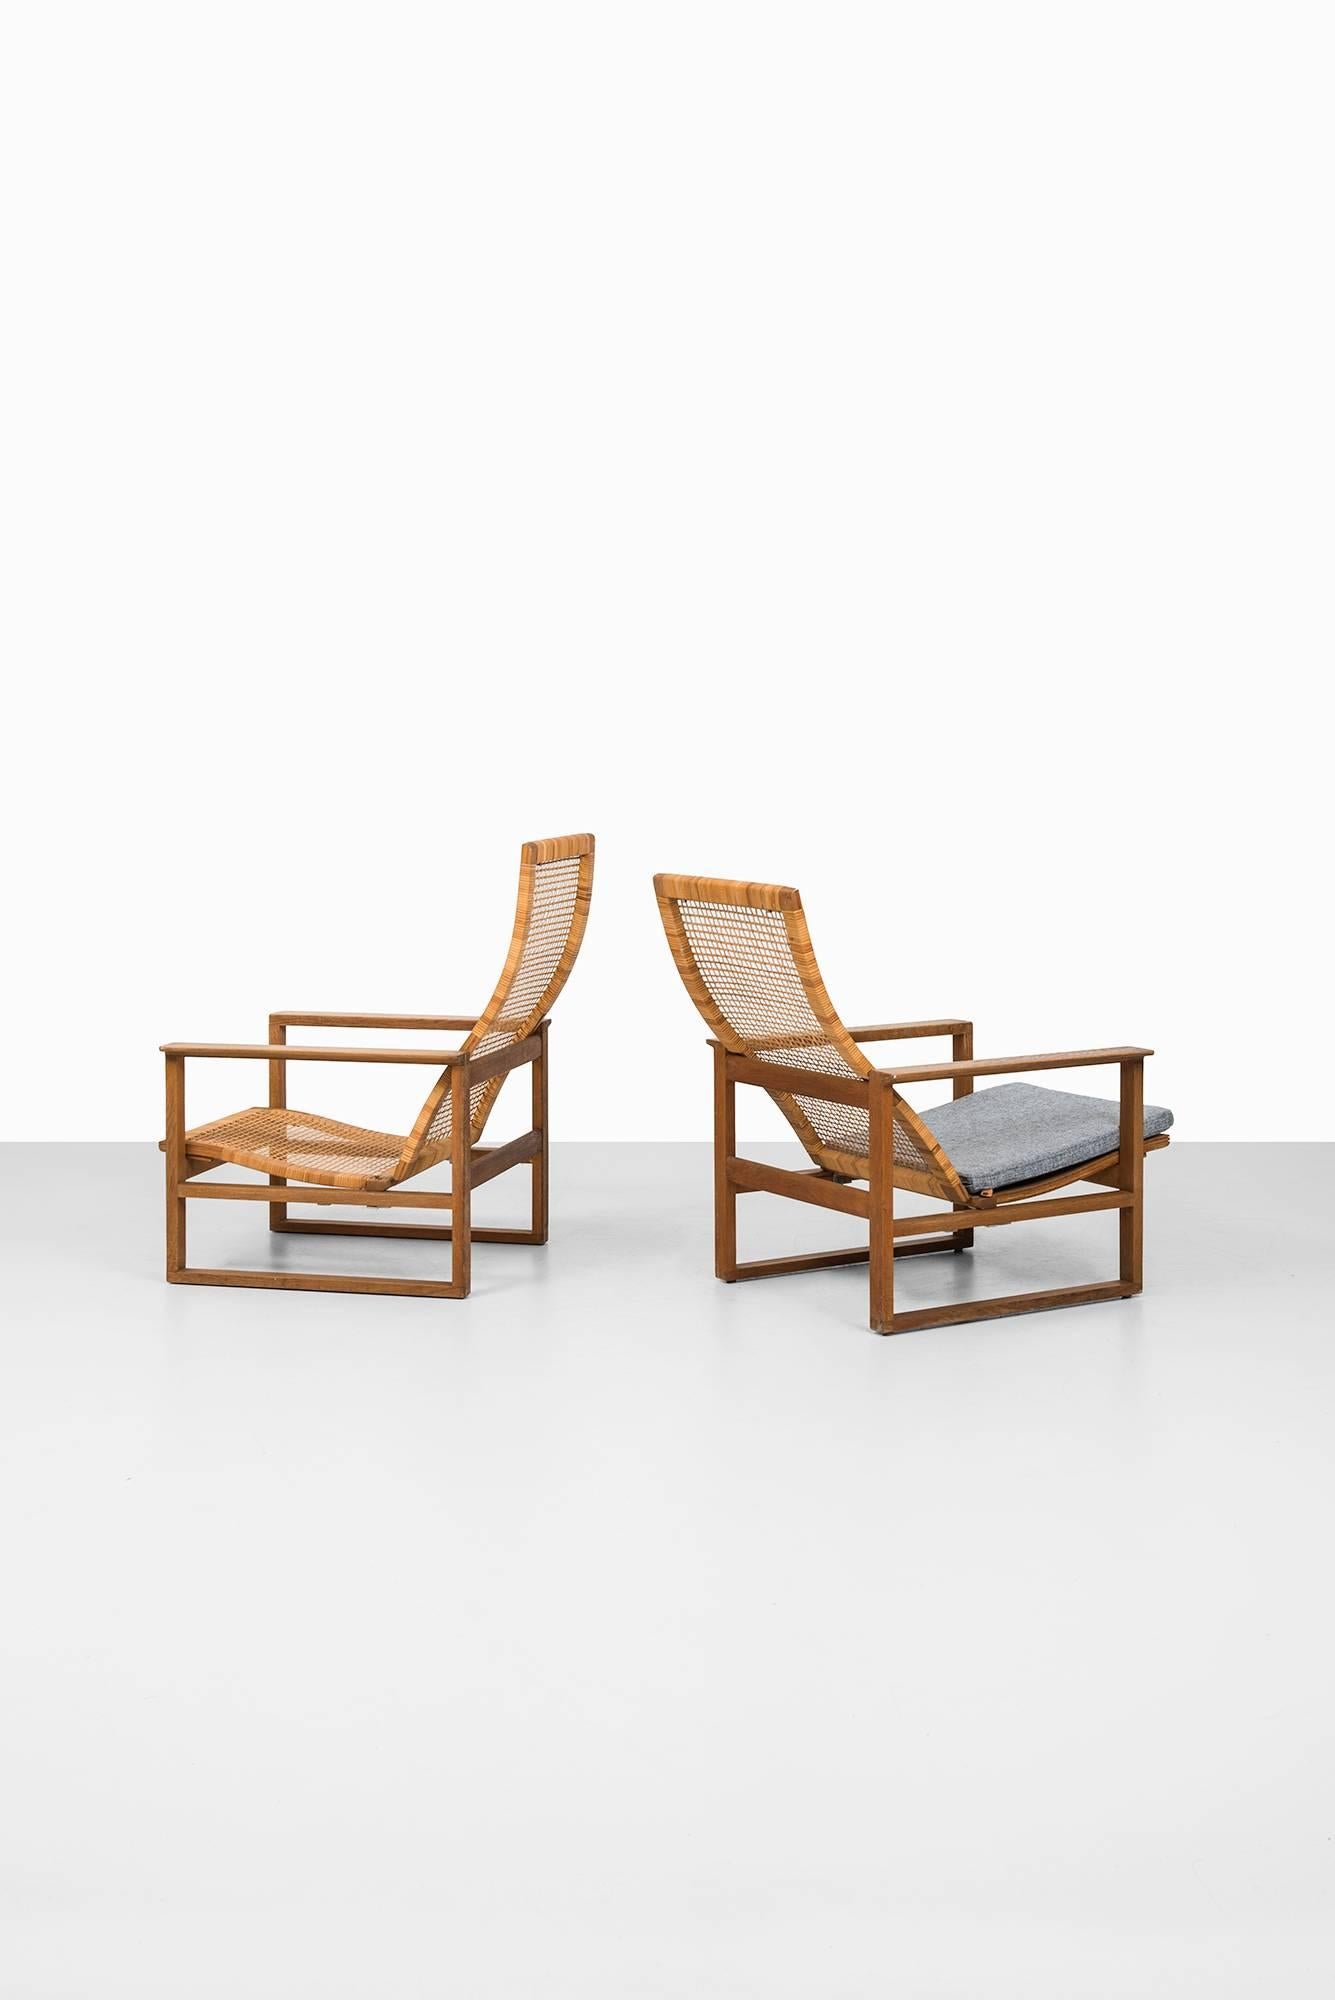 Rare pair of easy chairs model BM-2254/Slædestolen designed by Børge Mogensen. Produced by Fredericia Stolefabrik in Denmark. Two adjustable positions.